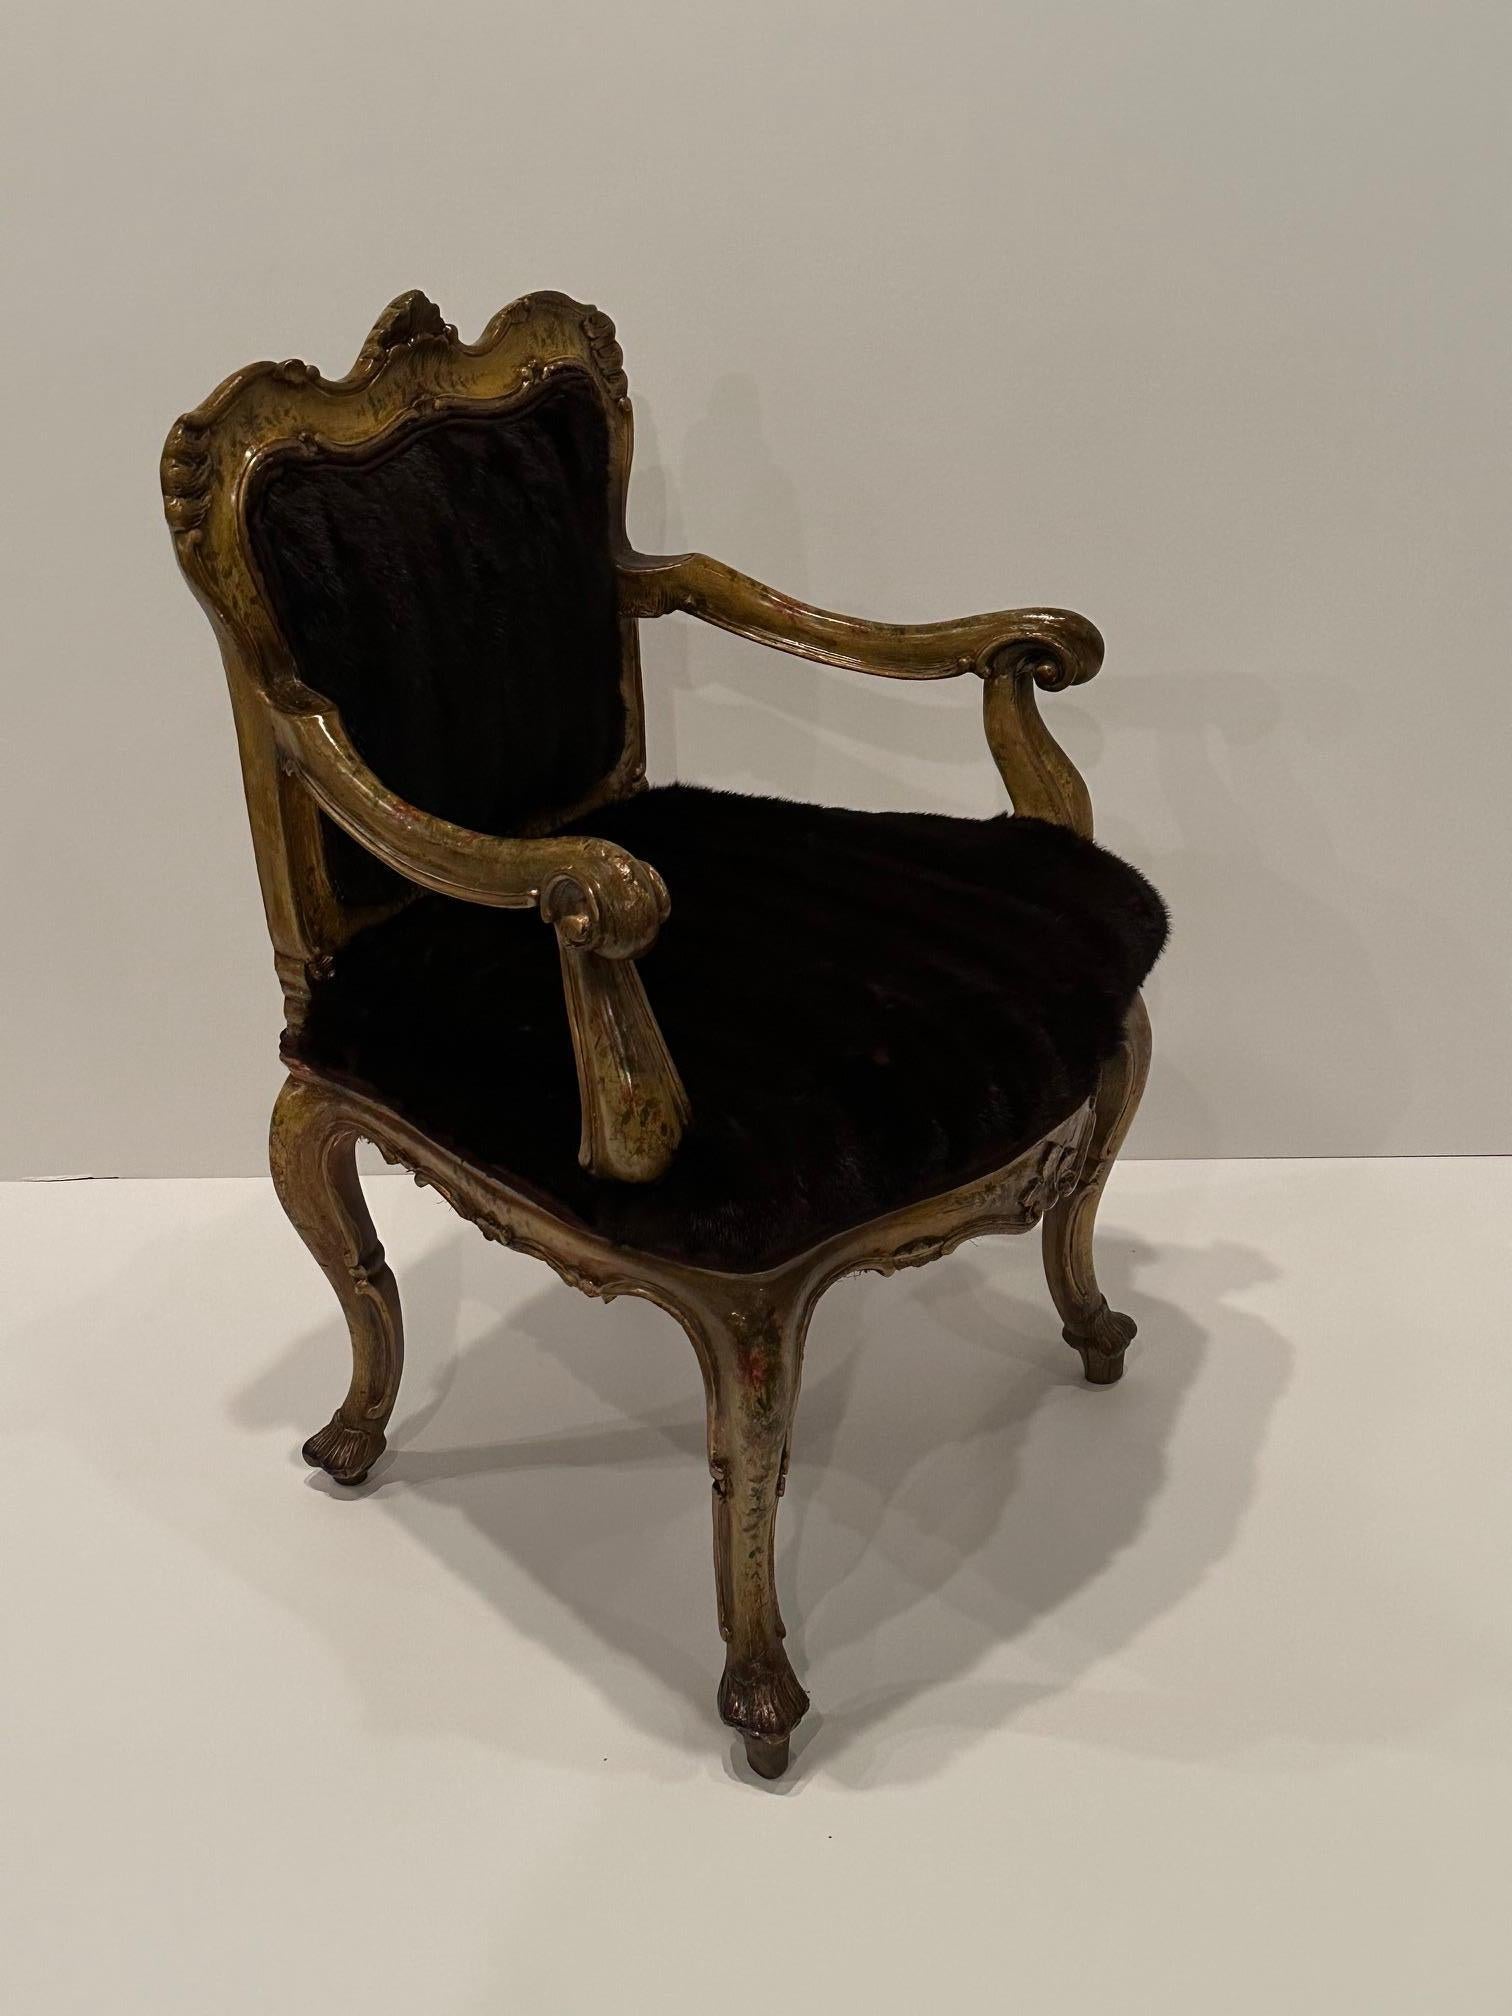 Sinfully Rich Ornate Italian Painted Venetian Armchair Upholstered in Mink Fur For Sale 3